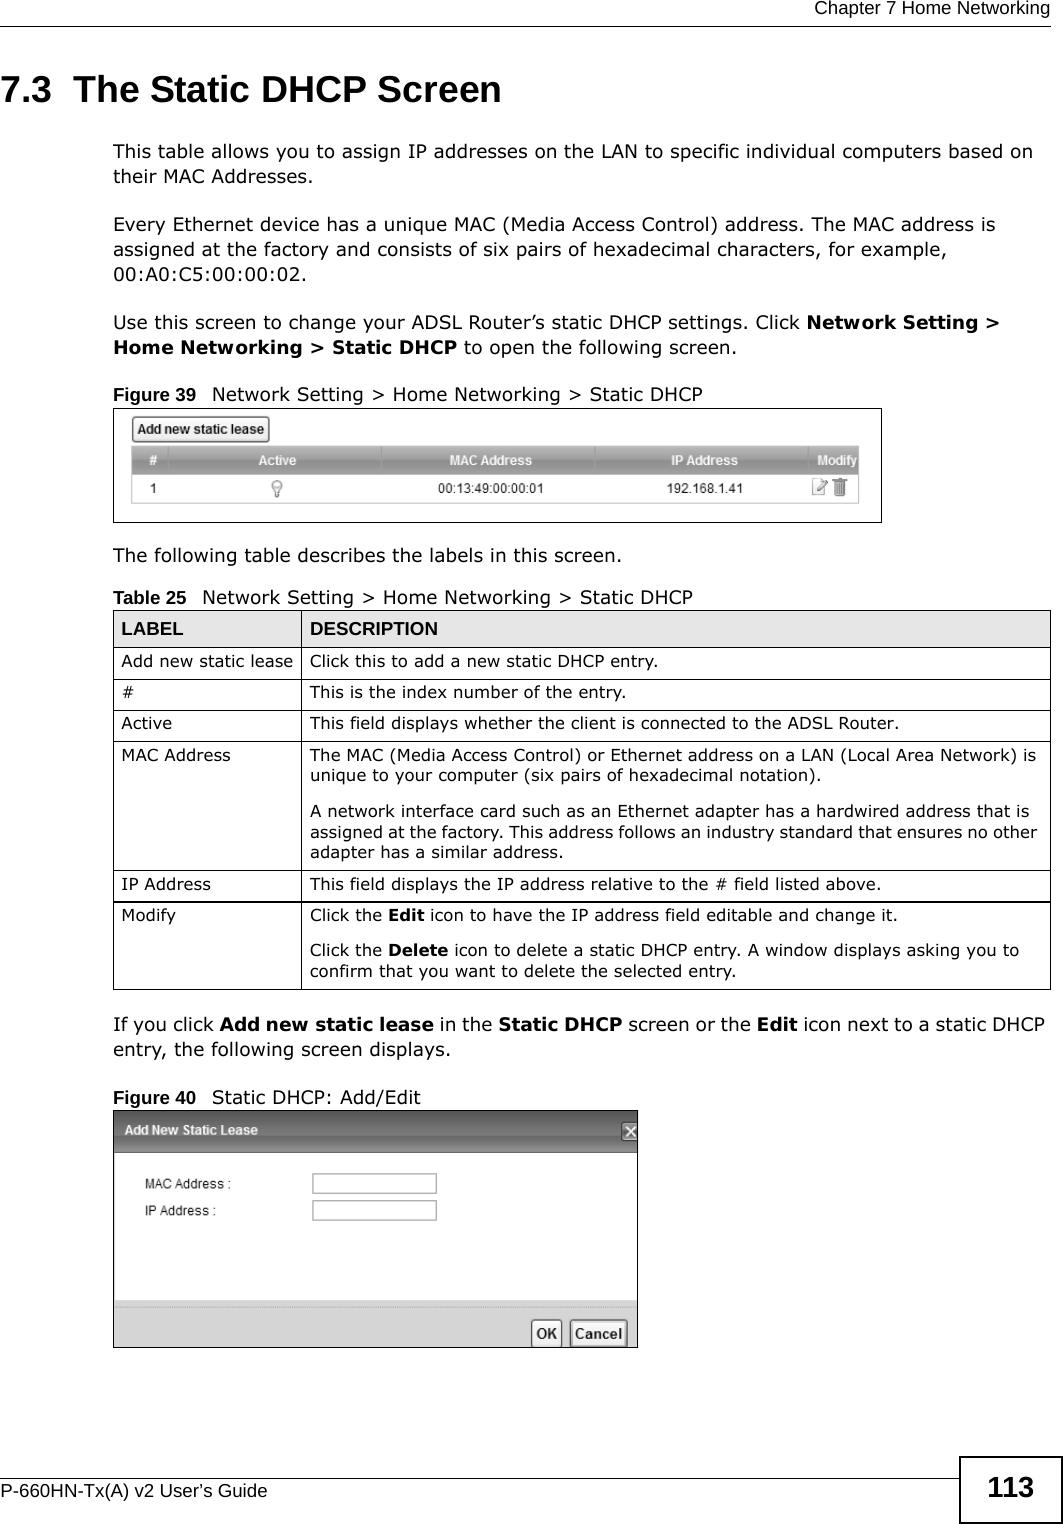  Chapter 7 Home NetworkingP-660HN-Tx(A) v2 User’s Guide 1137.3  The Static DHCP ScreenThis table allows you to assign IP addresses on the LAN to specific individual computers based on their MAC Addresses. Every Ethernet device has a unique MAC (Media Access Control) address. The MAC address is assigned at the factory and consists of six pairs of hexadecimal characters, for example, 00:A0:C5:00:00:02.Use this screen to change your ADSL Router’s static DHCP settings. Click Network Setting &gt; Home Networking &gt; Static DHCP to open the following screen.Figure 39   Network Setting &gt; Home Networking &gt; Static DHCP The following table describes the labels in this screen.If you click Add new static lease in the Static DHCP screen or the Edit icon next to a static DHCP entry, the following screen displays.Figure 40   Static DHCP: Add/EditTable 25   Network Setting &gt; Home Networking &gt; Static DHCPLABEL DESCRIPTIONAdd new static lease Click this to add a new static DHCP entry. # This is the index number of the entry.Active This field displays whether the client is connected to the ADSL Router.MAC Address The MAC (Media Access Control) or Ethernet address on a LAN (Local Area Network) is unique to your computer (six pairs of hexadecimal notation).A network interface card such as an Ethernet adapter has a hardwired address that is assigned at the factory. This address follows an industry standard that ensures no other adapter has a similar address.IP Address This field displays the IP address relative to the # field listed above.Modify Click the Edit icon to have the IP address field editable and change it.Click the Delete icon to delete a static DHCP entry. A window displays asking you to confirm that you want to delete the selected entry.